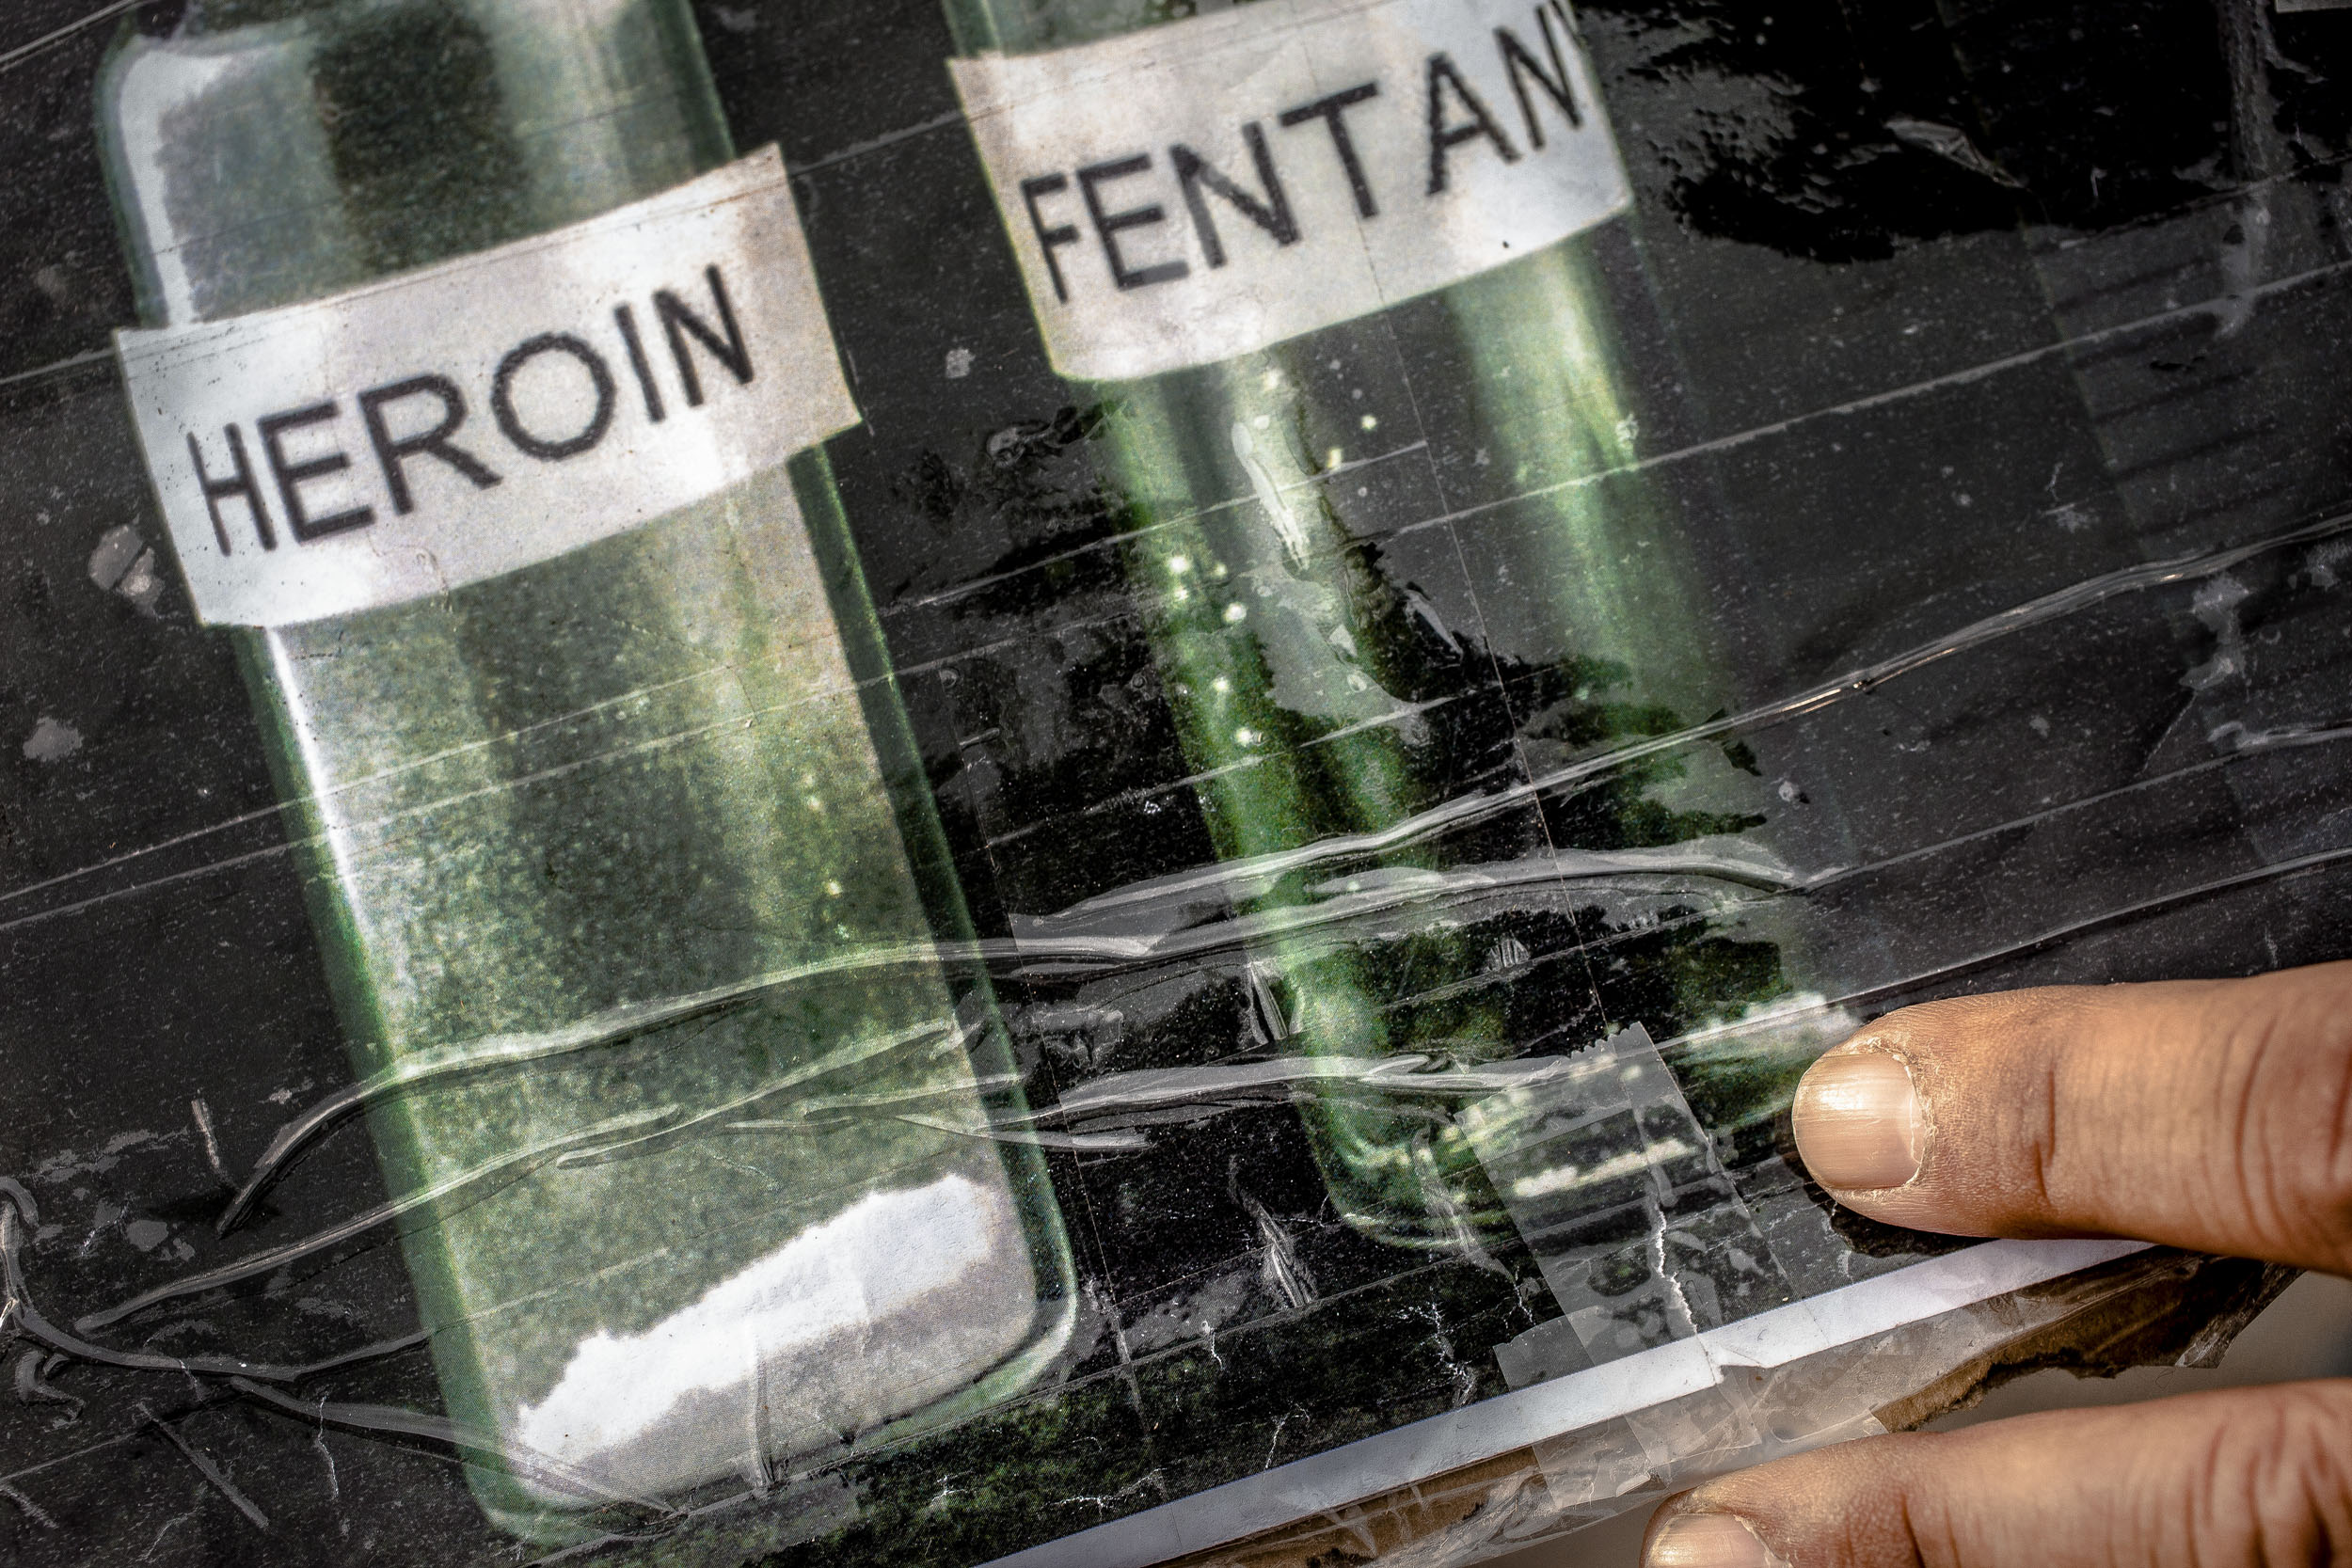 Heroin and Fentanyl.